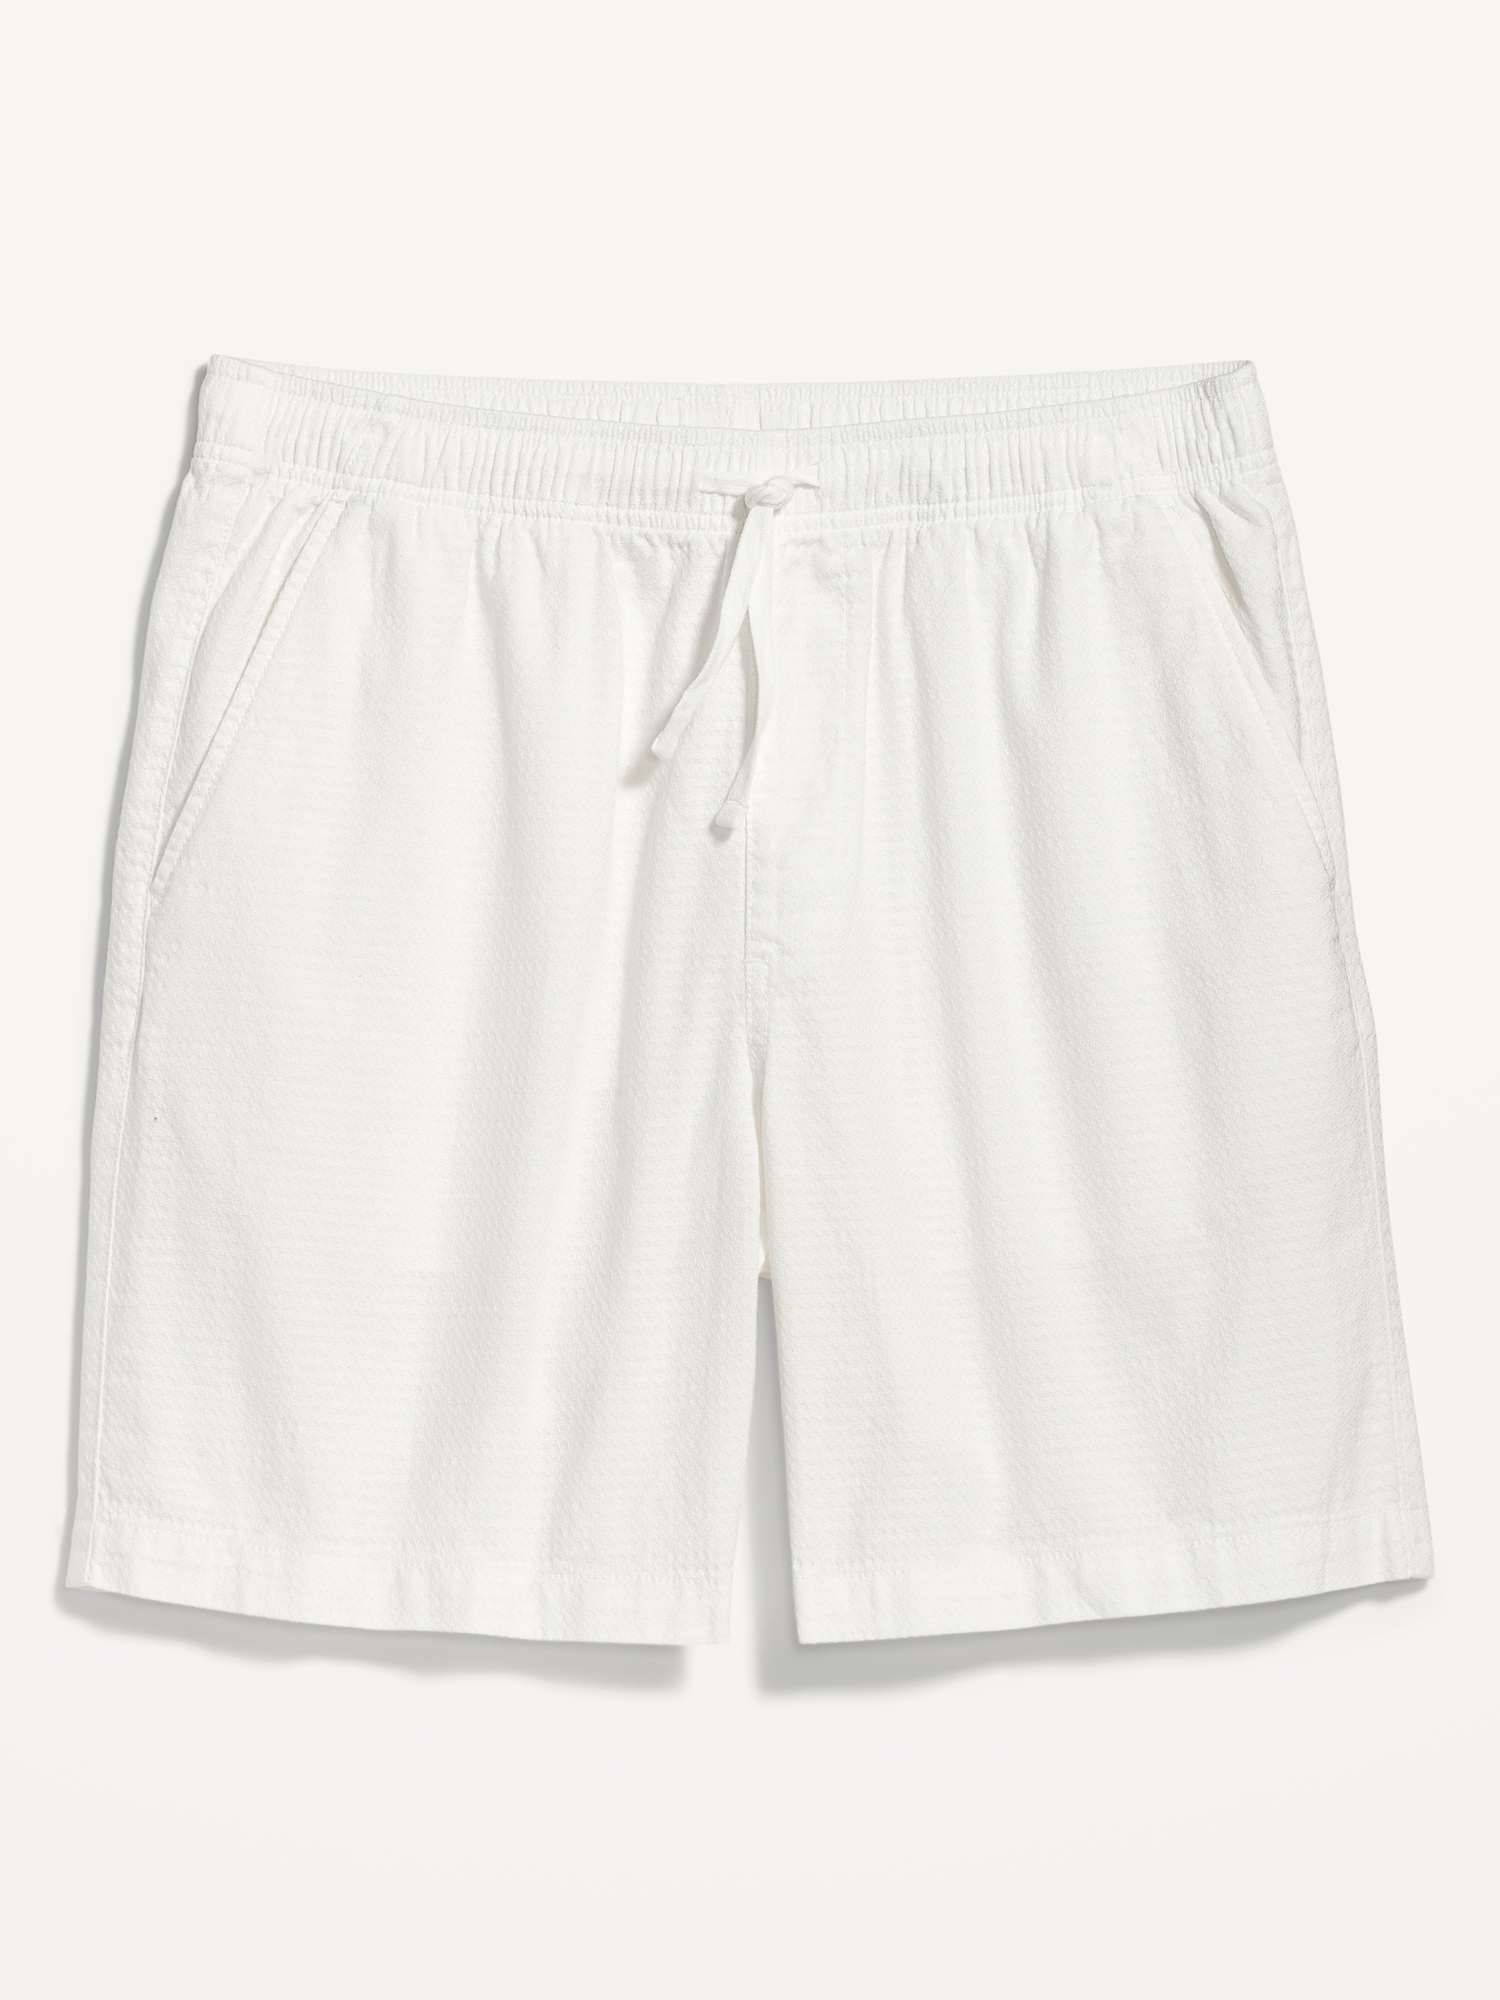 Textured Jogger Shorts -- 7-inch inseam | Old Navy